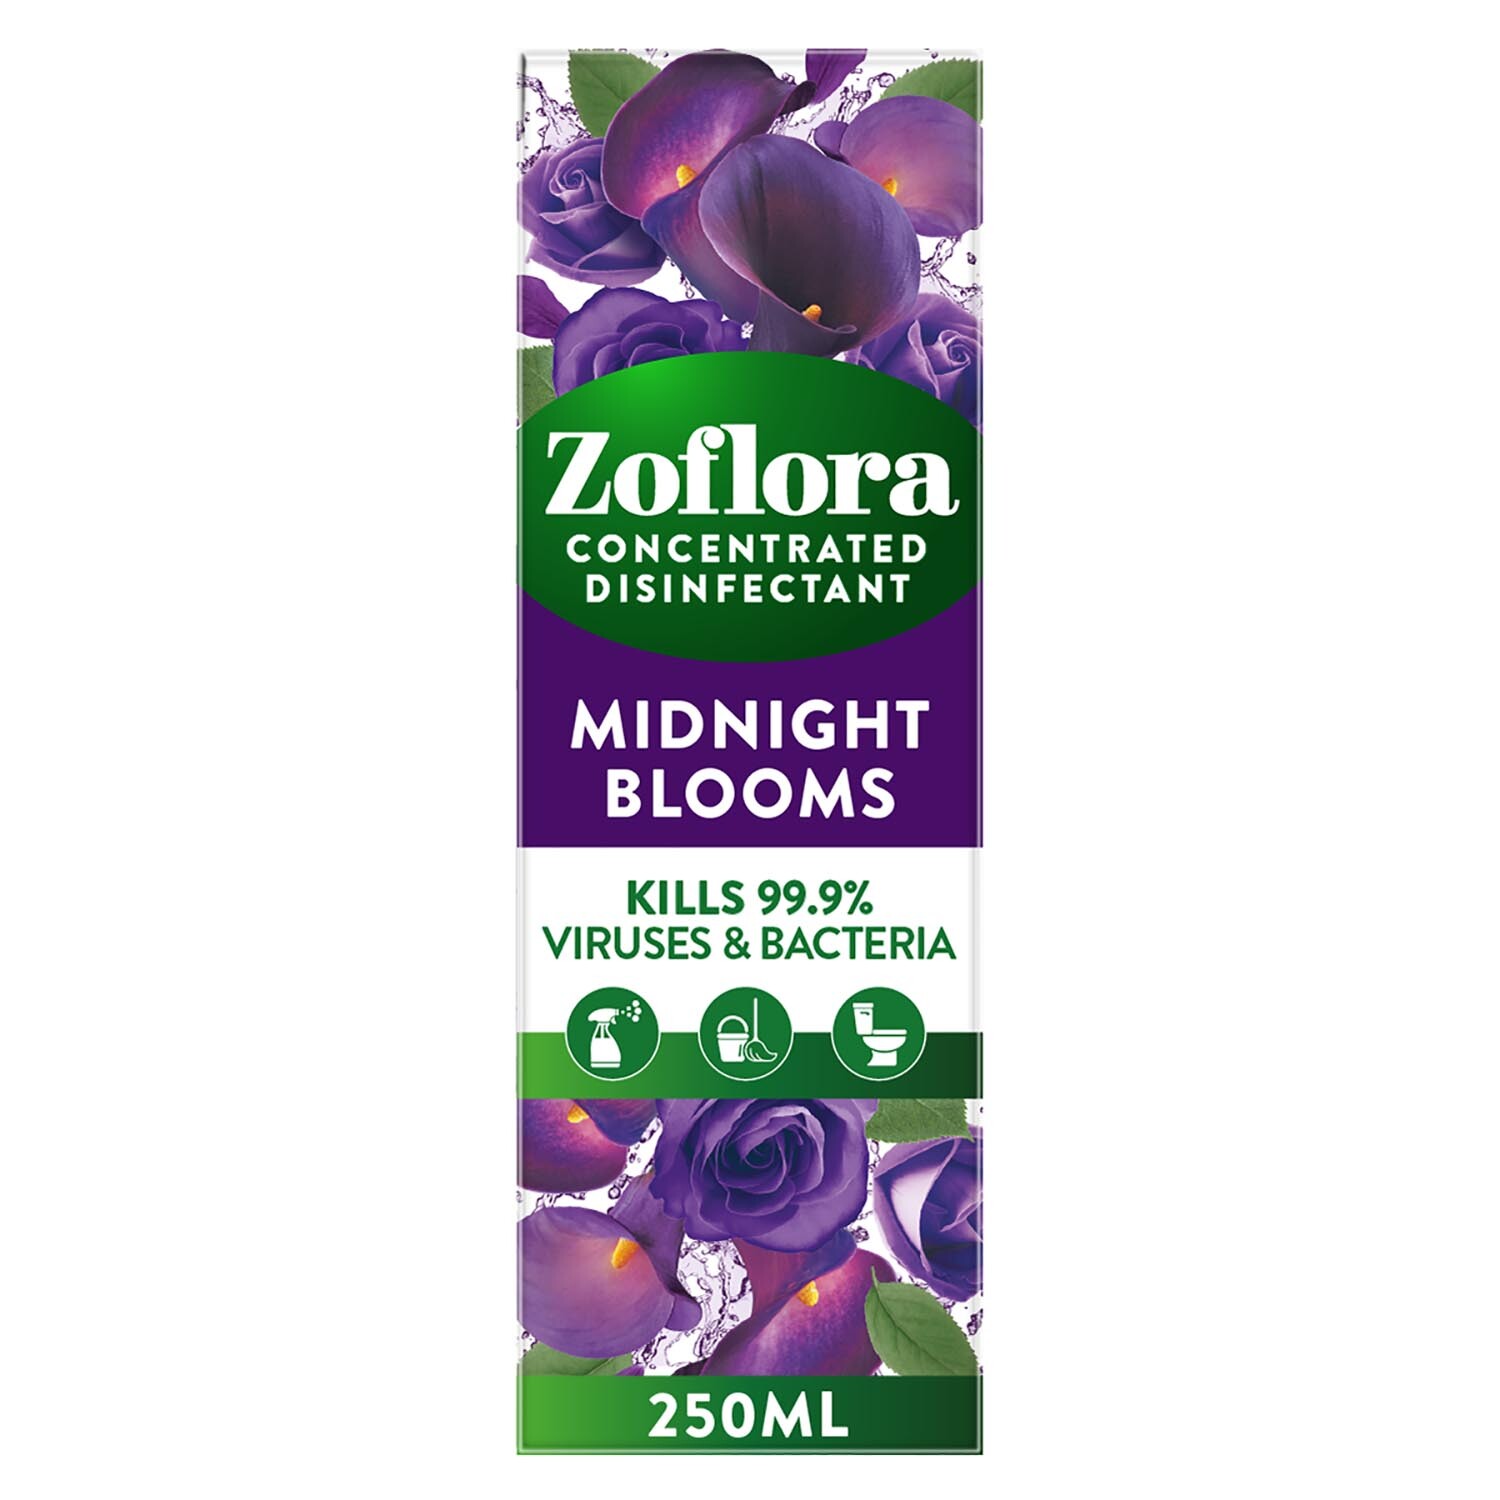 Zoflora Midnight Blooms Concentrated Disinfectant 250ml Image 1